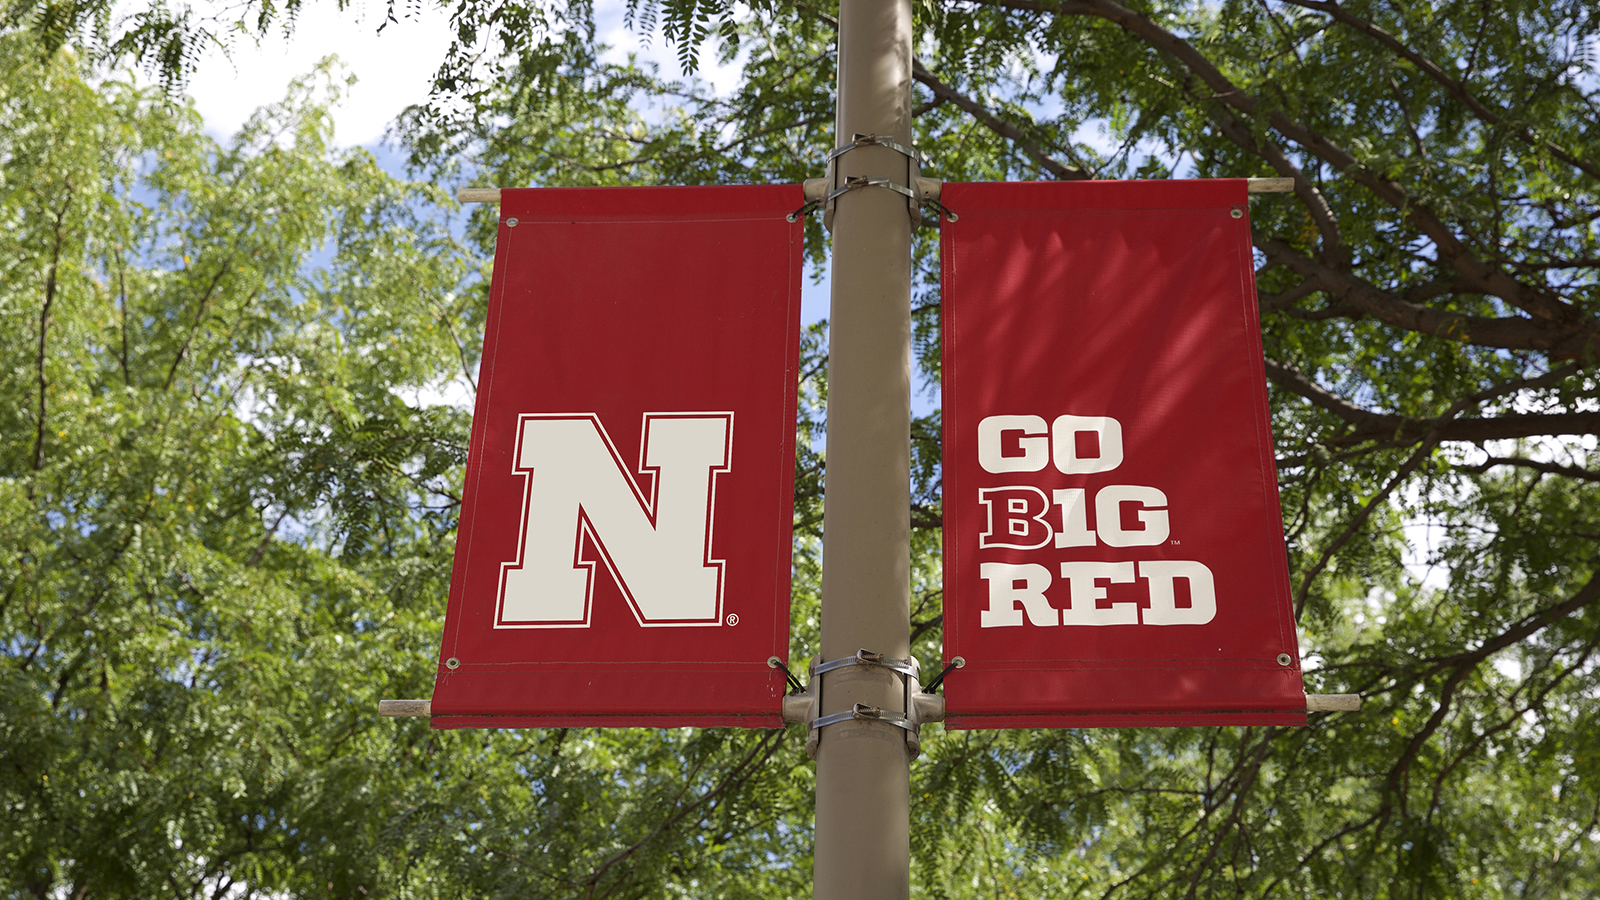 banners along campus, one with an N, one that says GO B1G RED